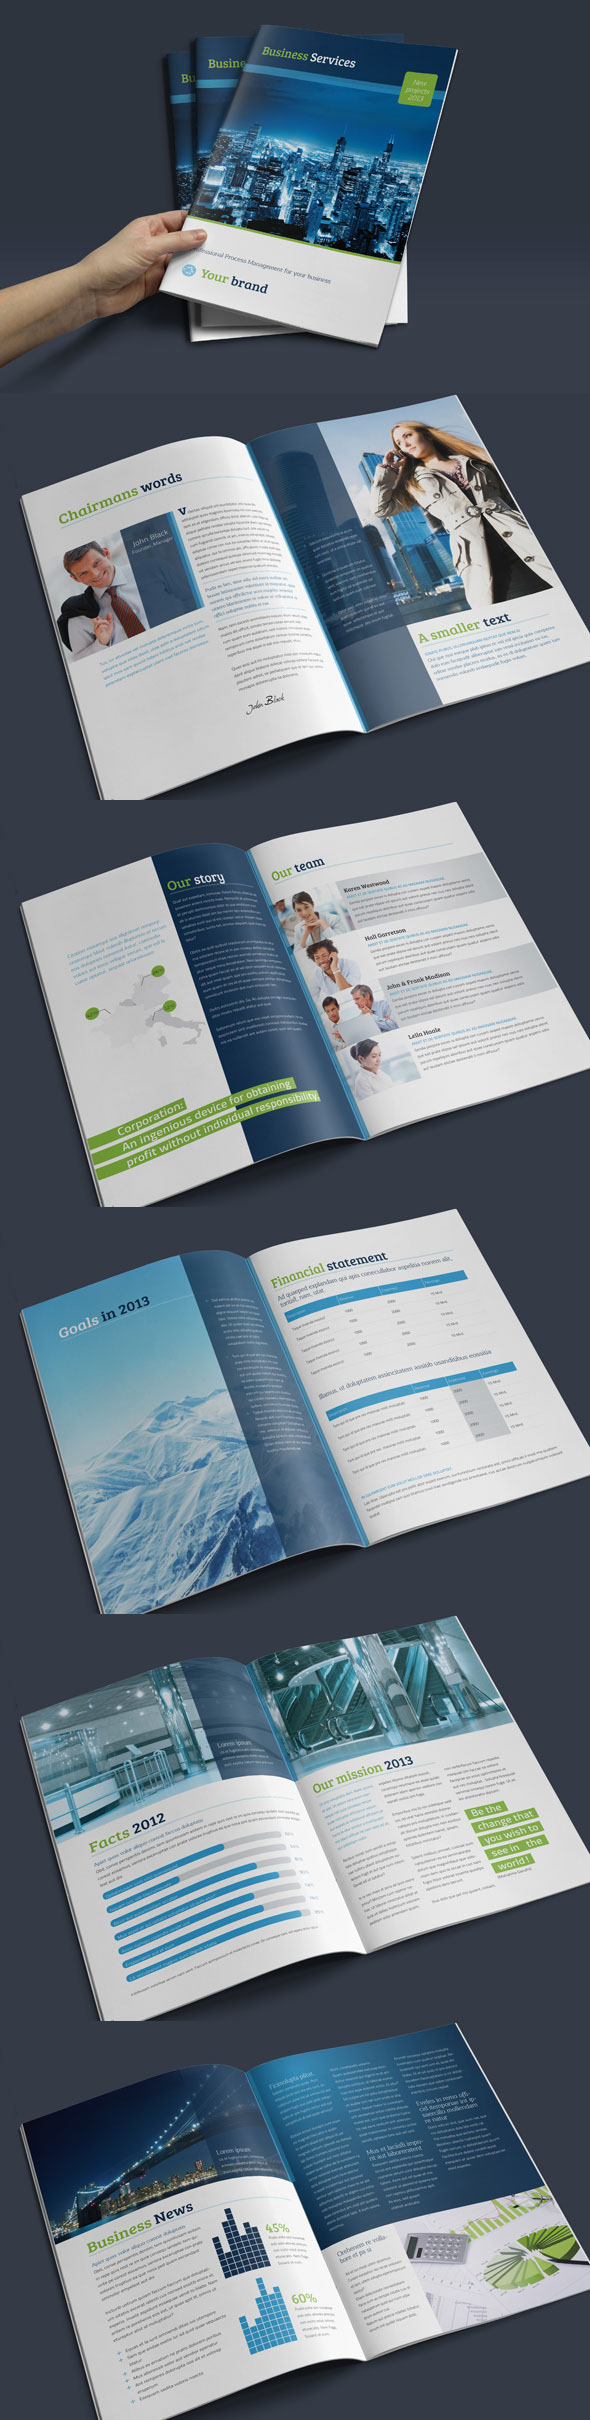 brochure business brochure  template  indesign  DIN A4  a4 image brochure  report  annual report